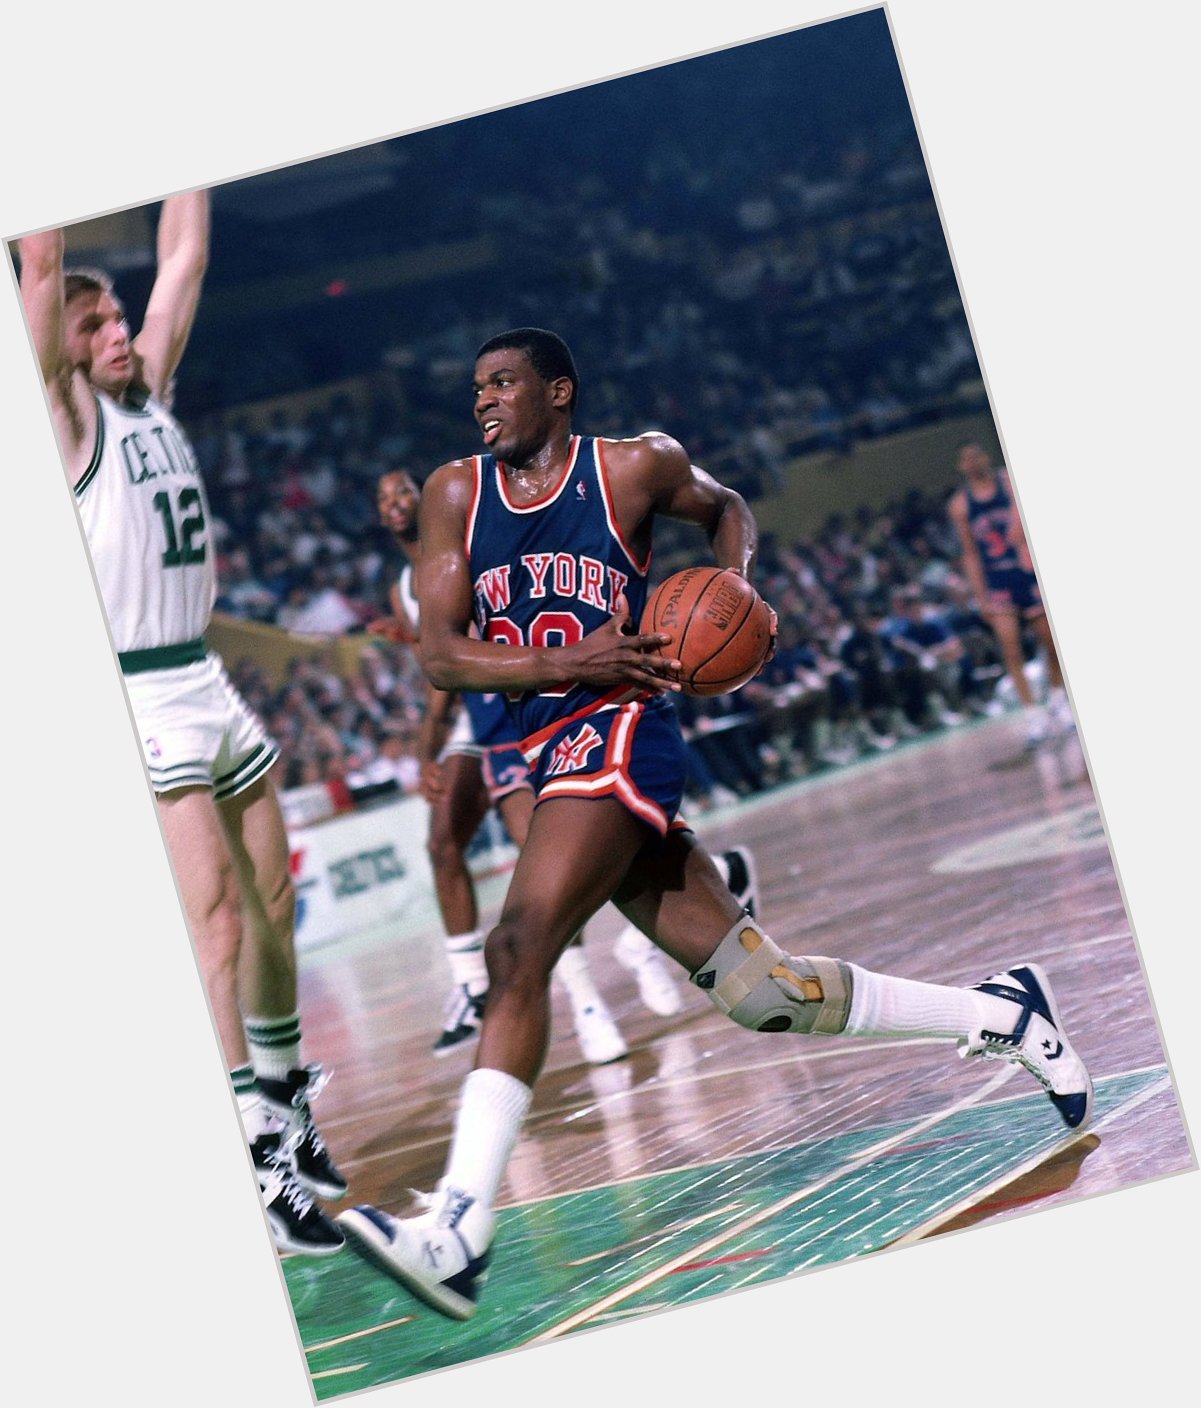 Also Happy 65th Birthday to another hall of famer, Bernard King. 